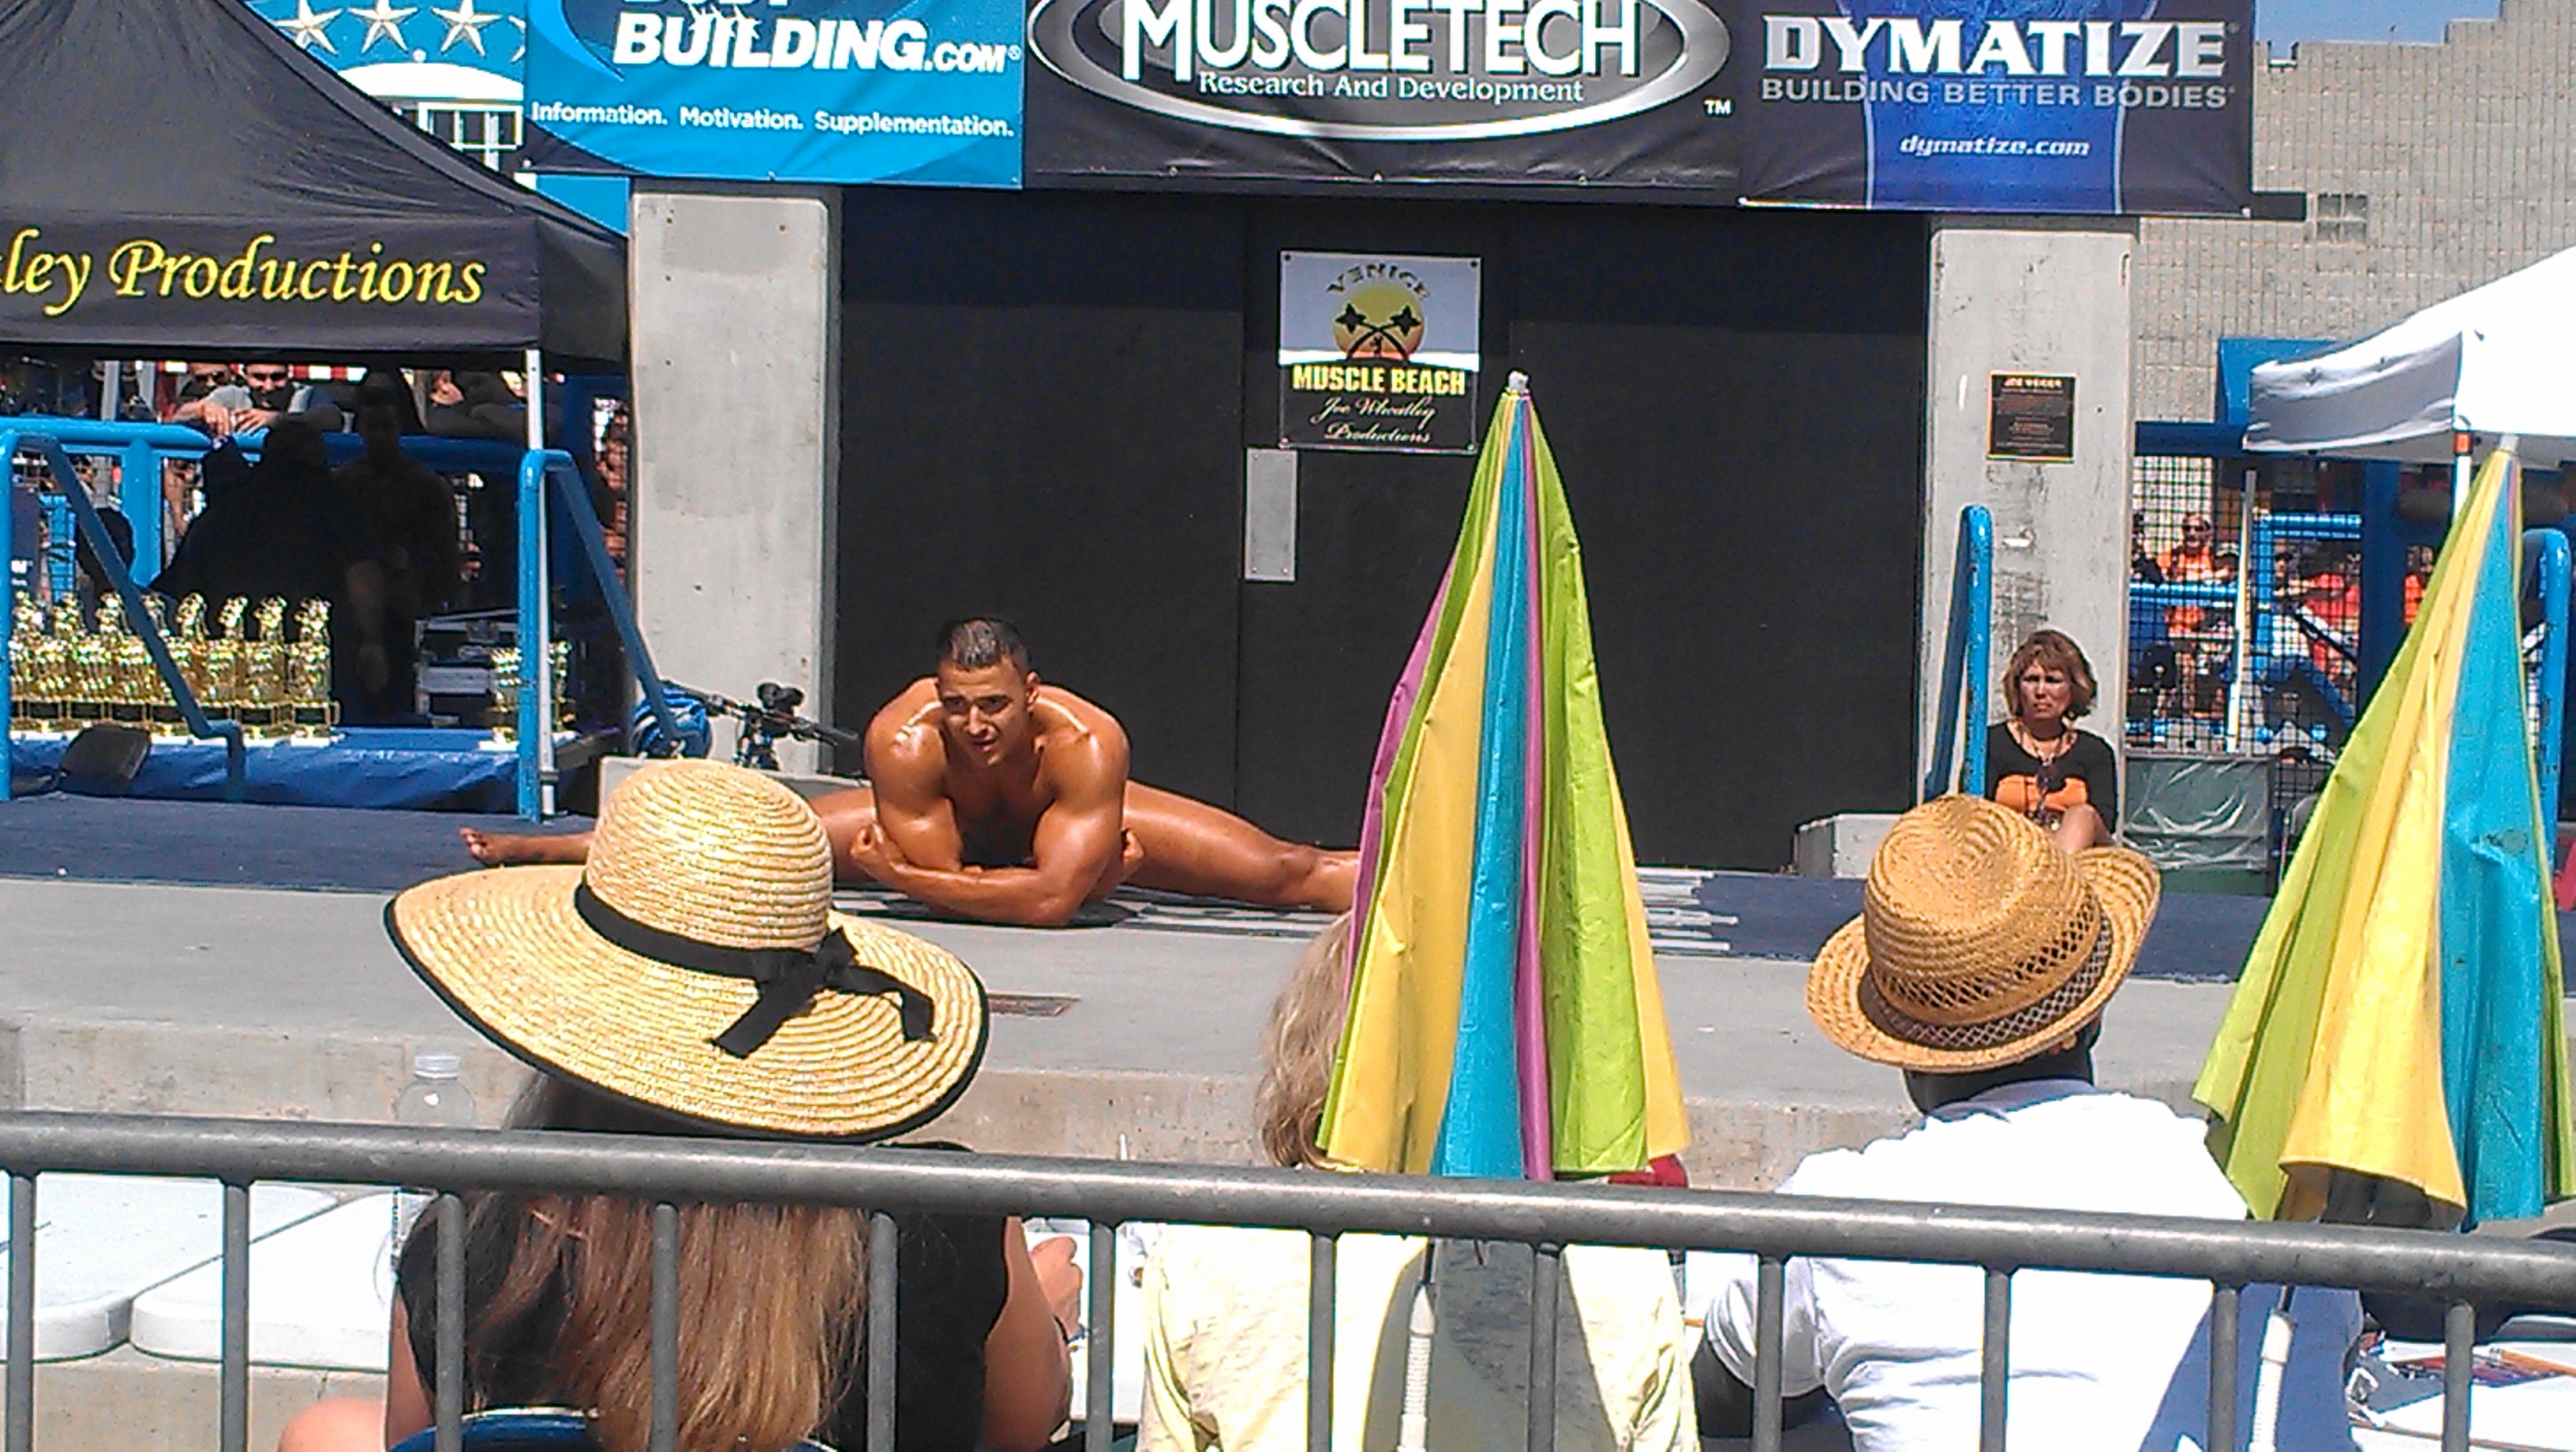 Splits on The Stage of Venice Muscle Beach Body Building Show 2011